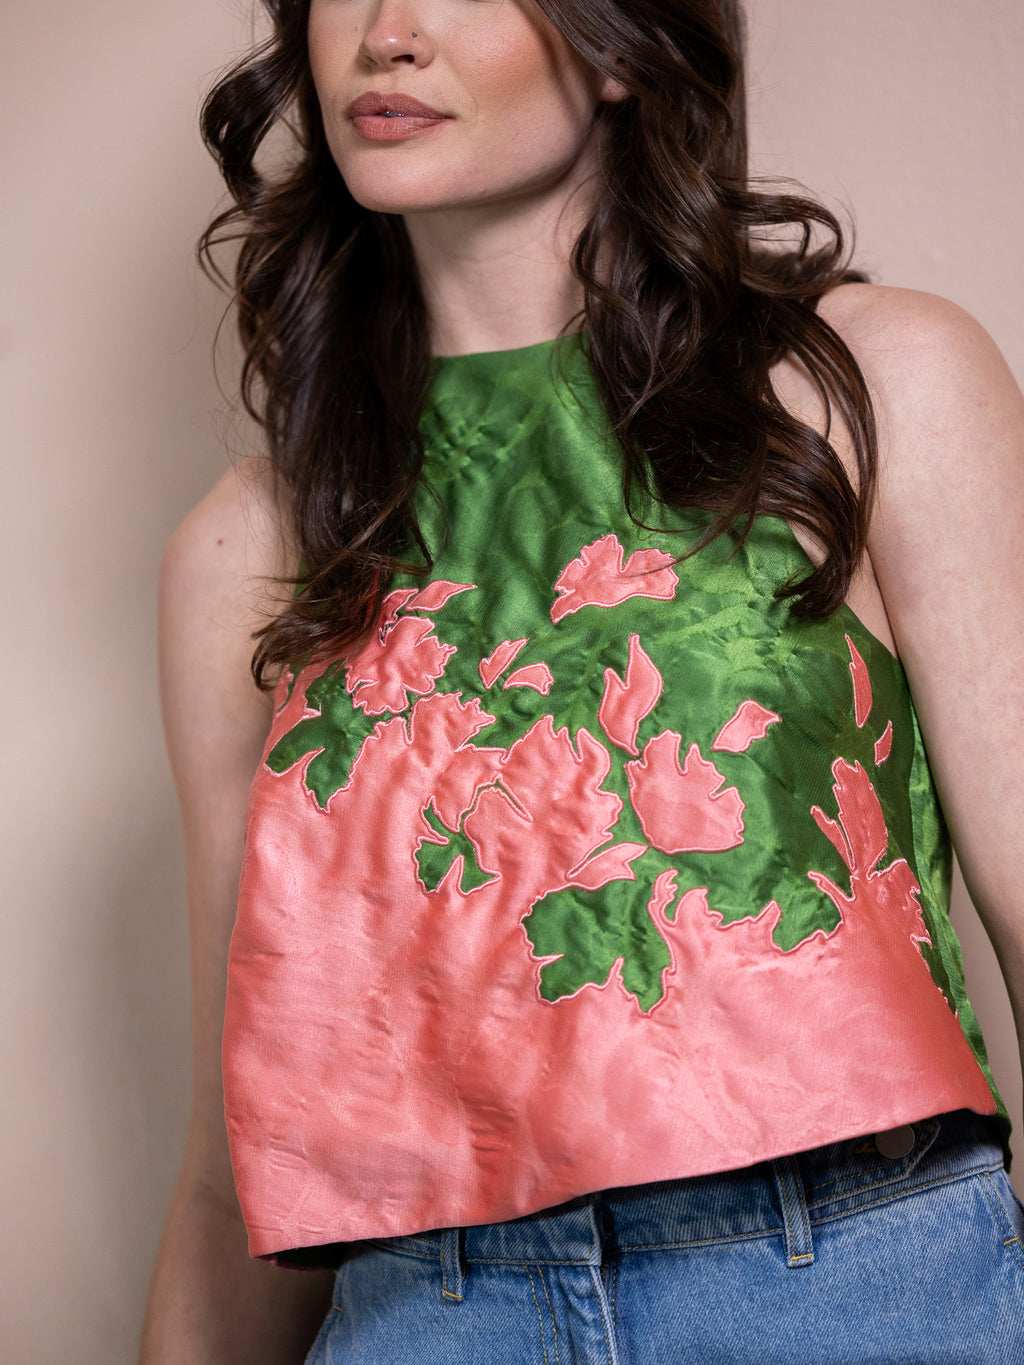 Woman in pink and green floral tank top and blue jeans against pink background